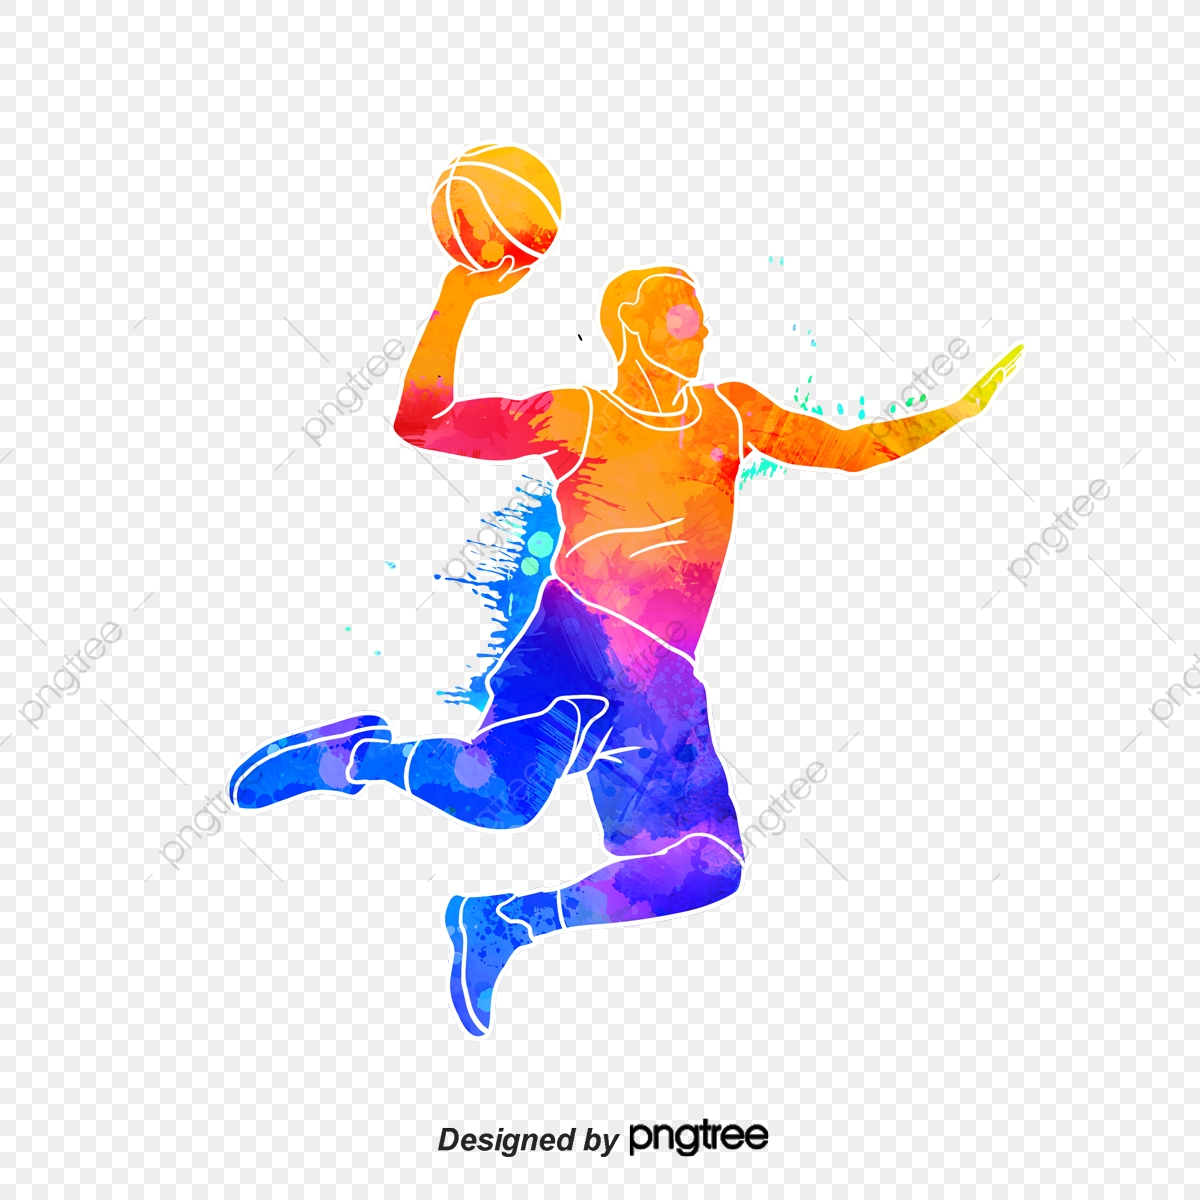 Silhouettes Of Creative Basketball Players, Multicolored, Character.